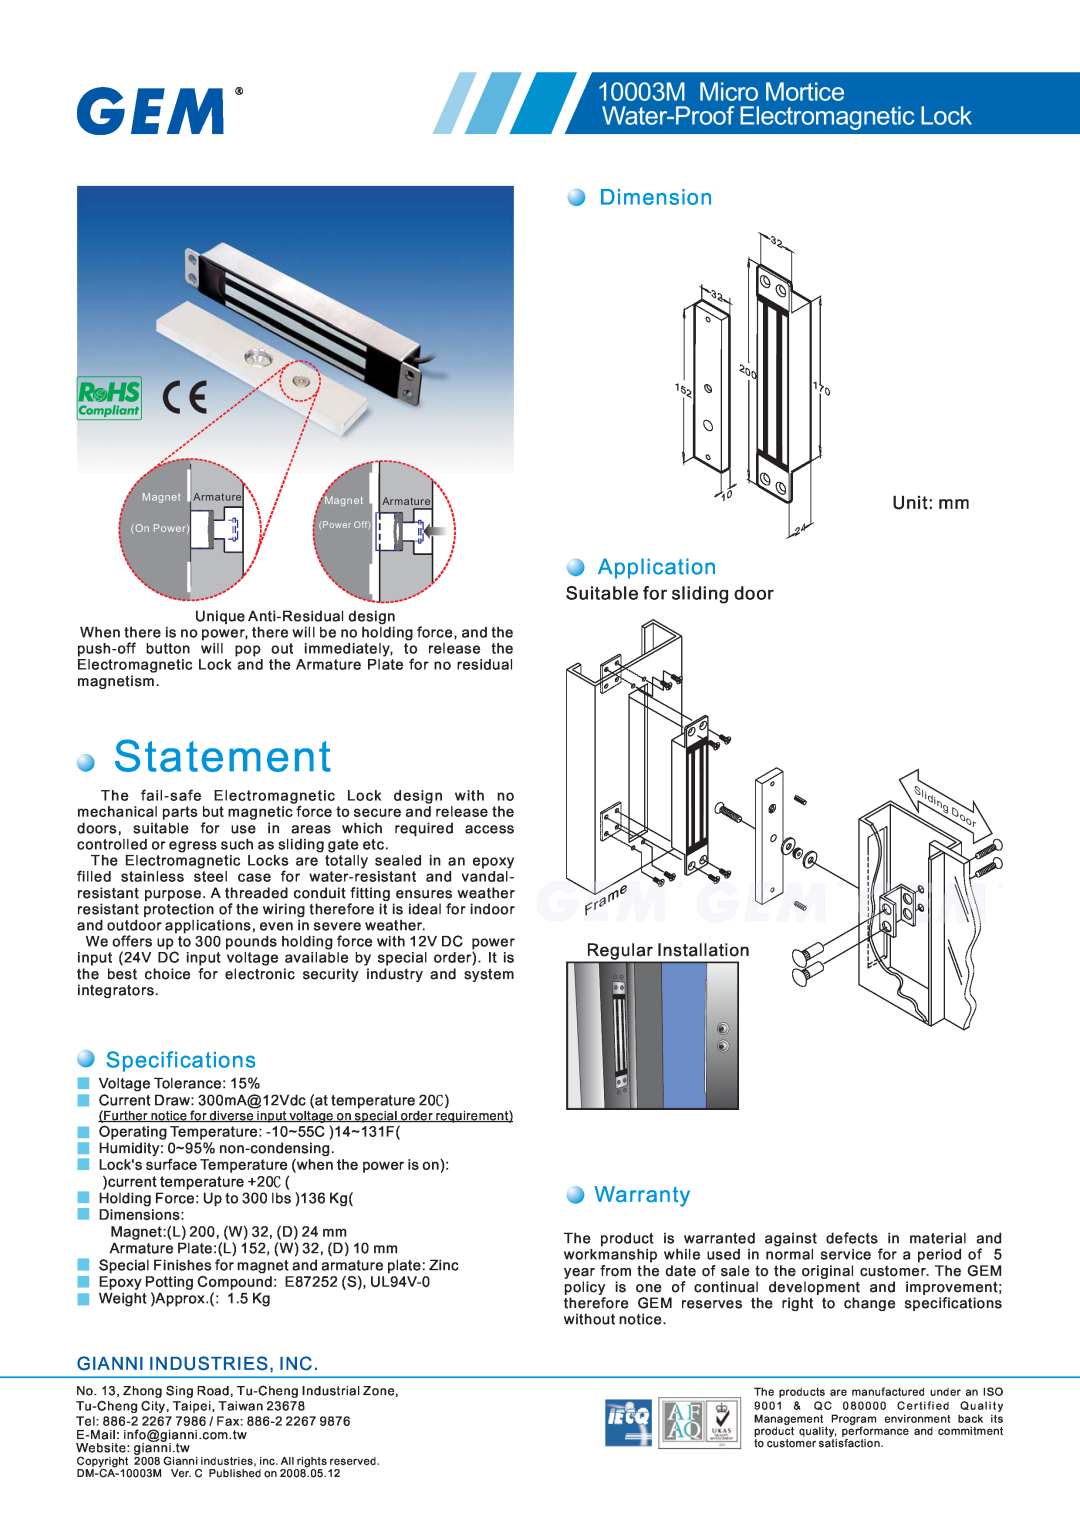 Gianni Industries specifications Statement, 10003M Micro Mortice Water-Proof Electromagnetic Lock, Dimension, Warranty 